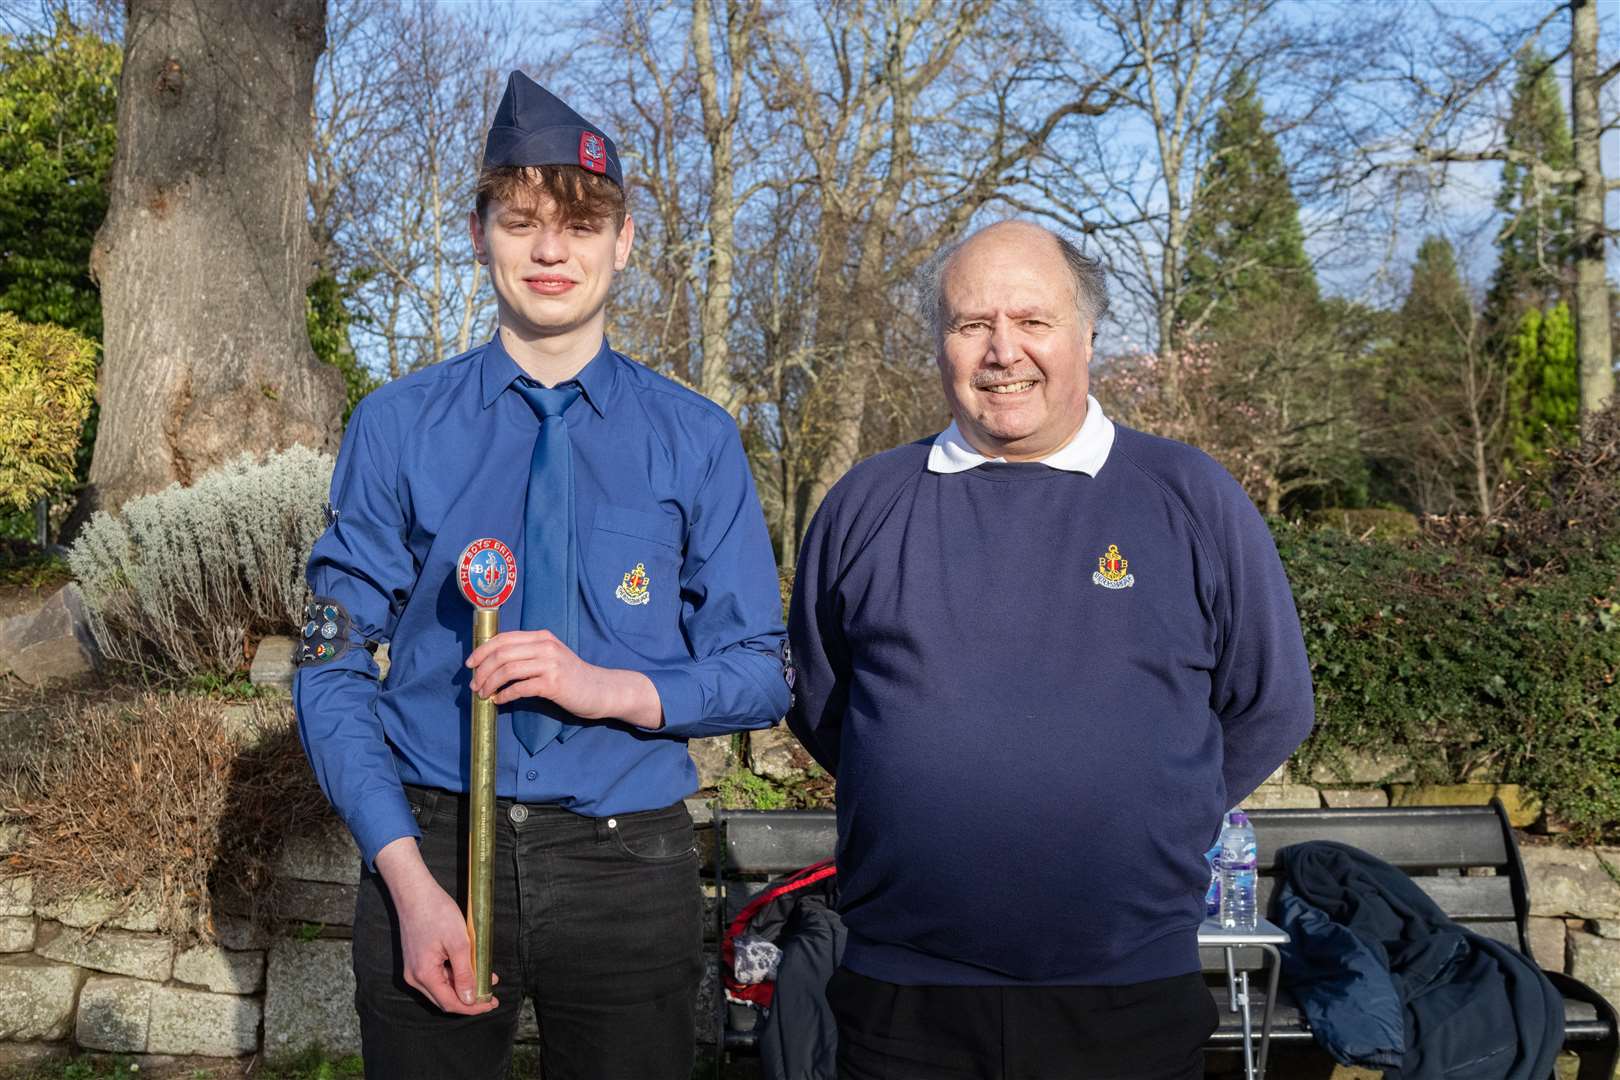 Callum Machray and Graeme Ferguson with the Kings Baton. Members of Forres Boys’ Brigade handing theKings Baton down from Nelson’s Tower to Grant Park.